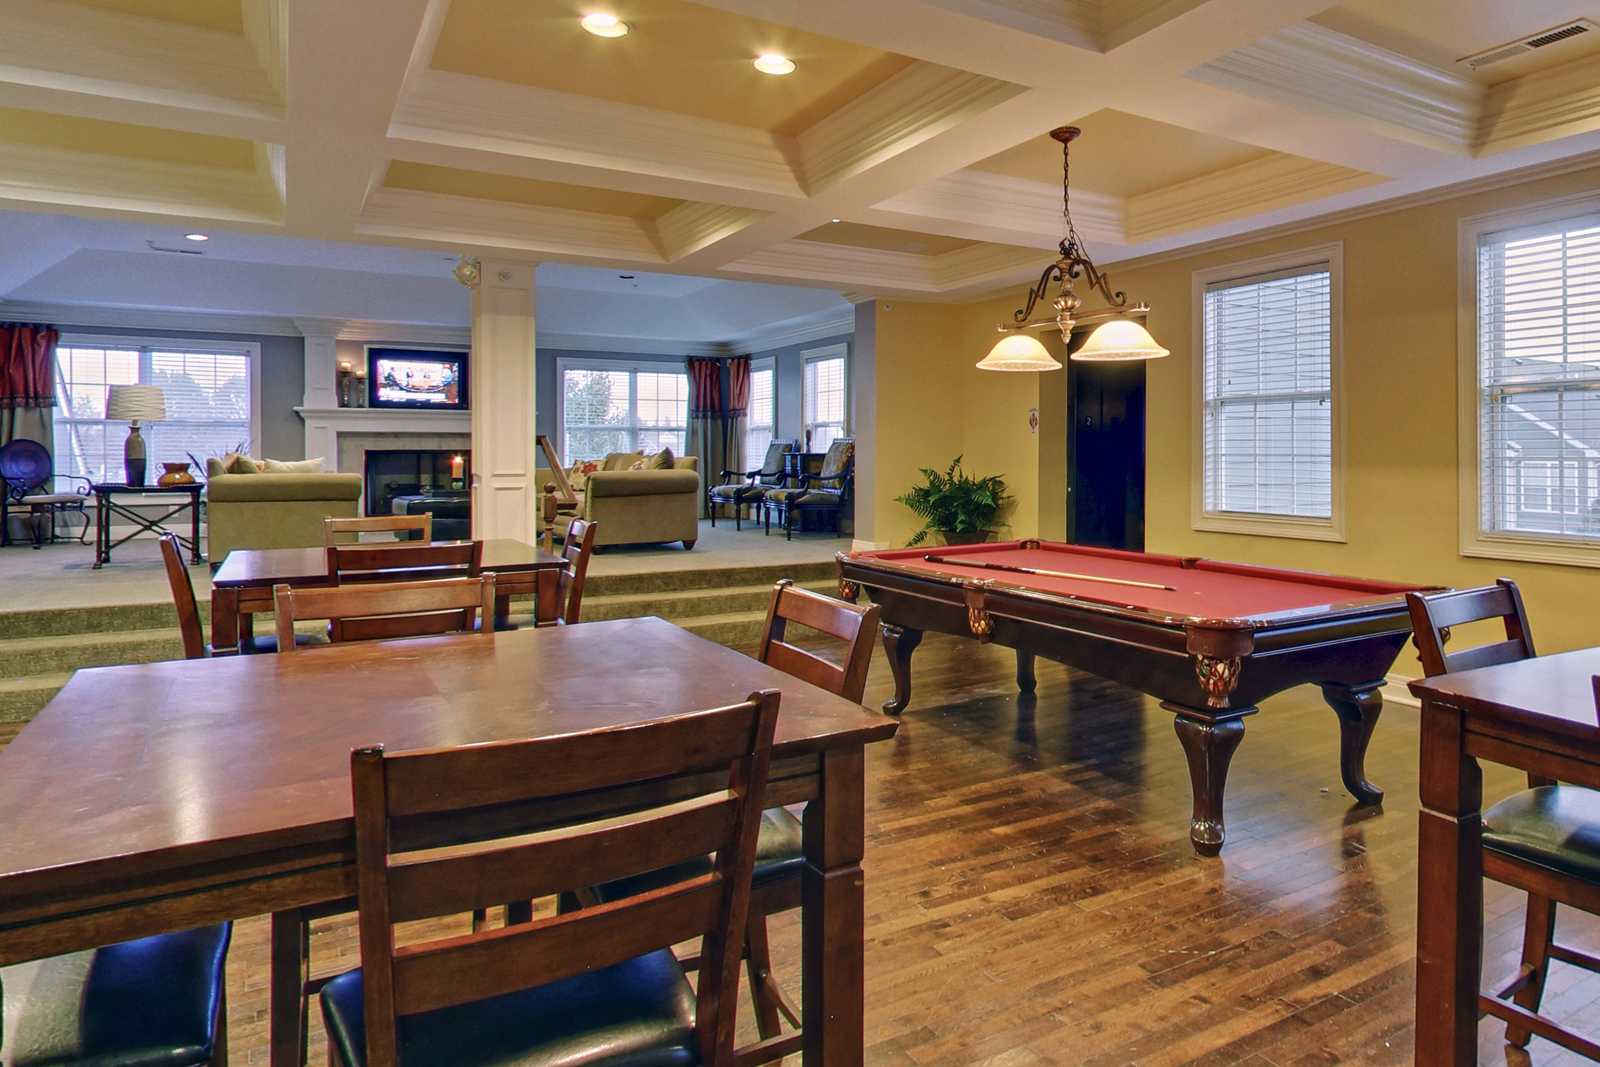 Billiards Room at The Falls at Settlers Walk Apartments in Springboro, OH